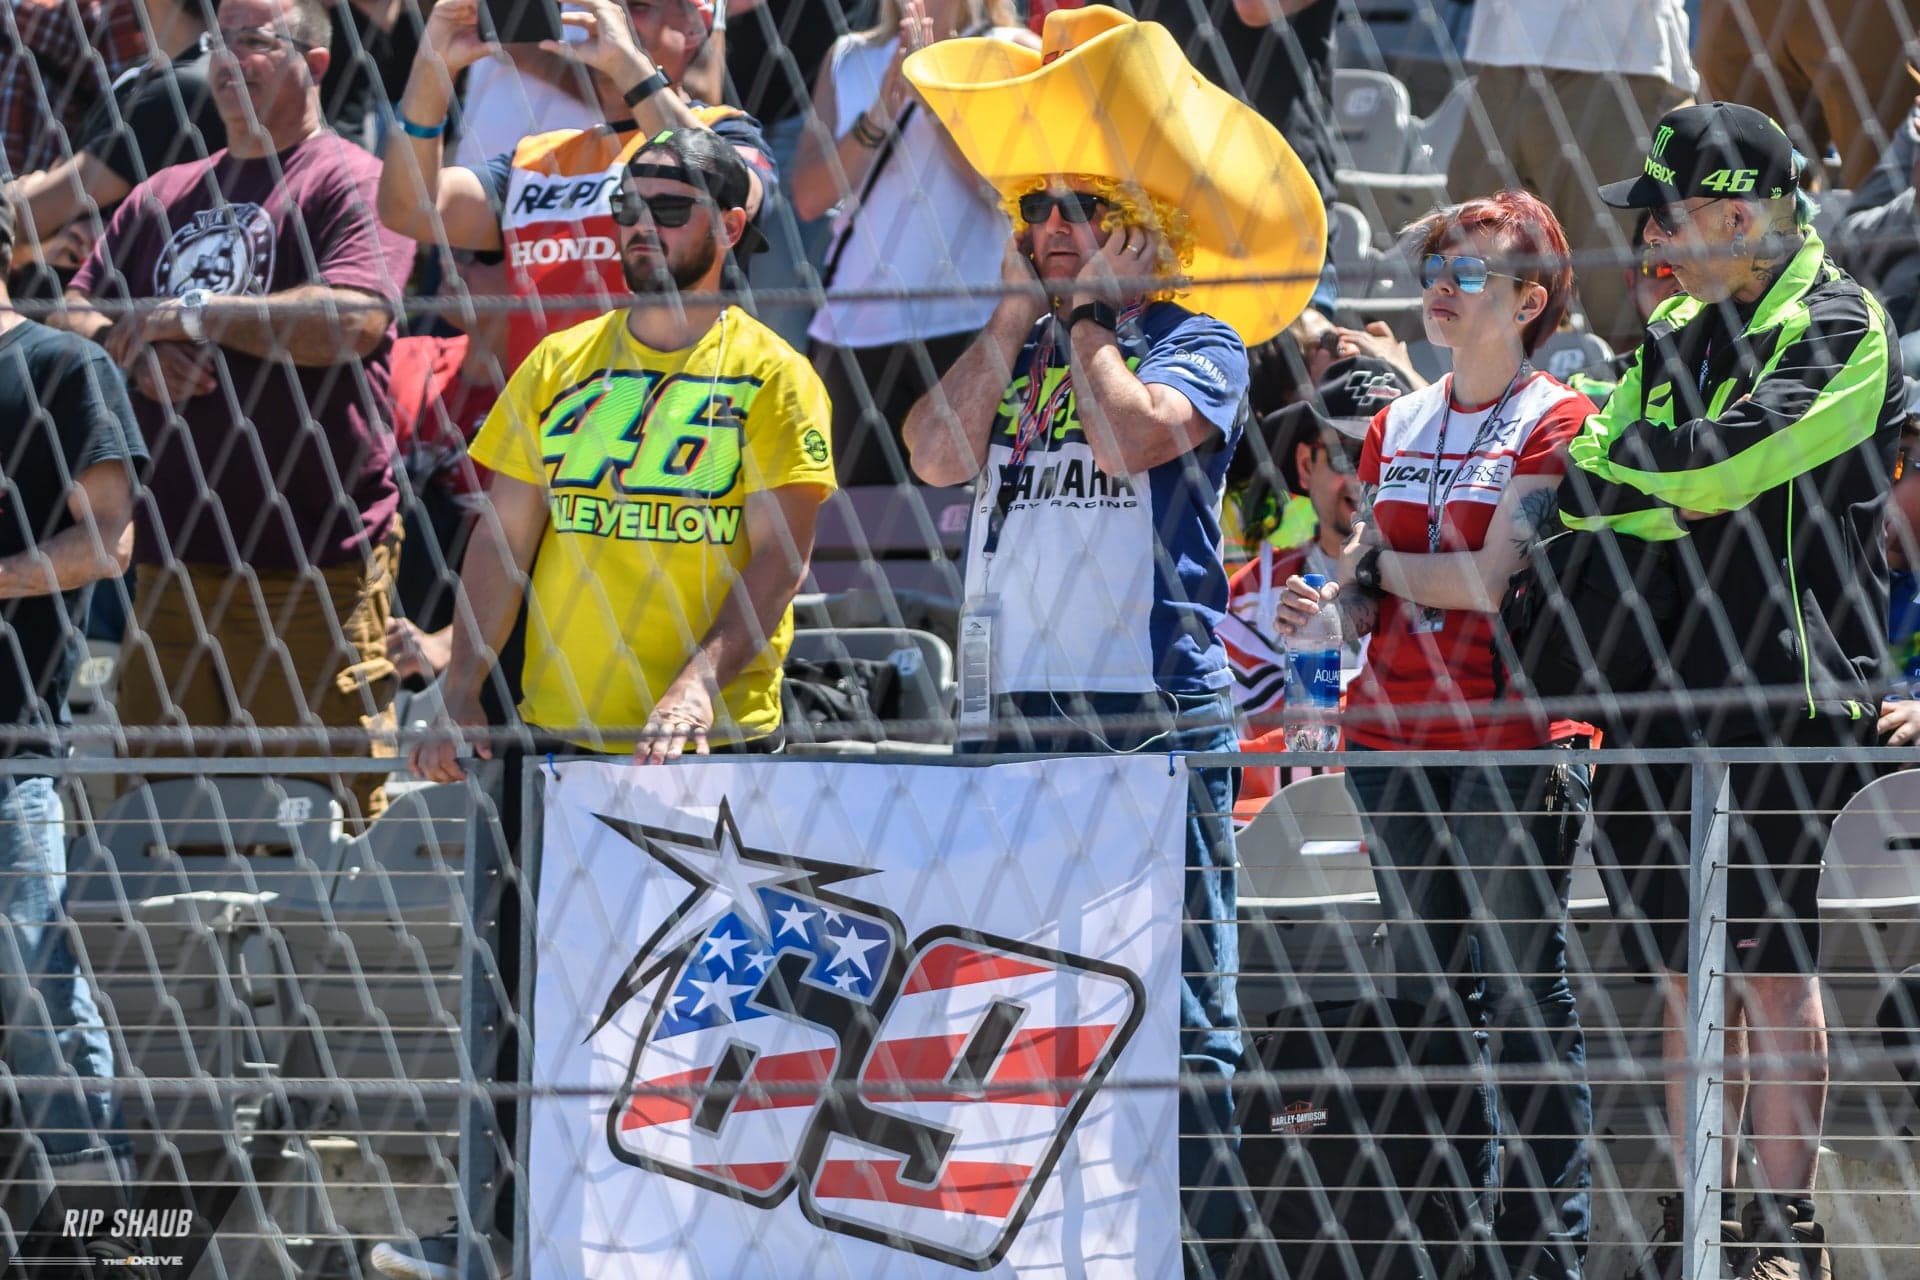 MotoGP Fans and Riders Show Their Love for Nicky Hayden in Austin